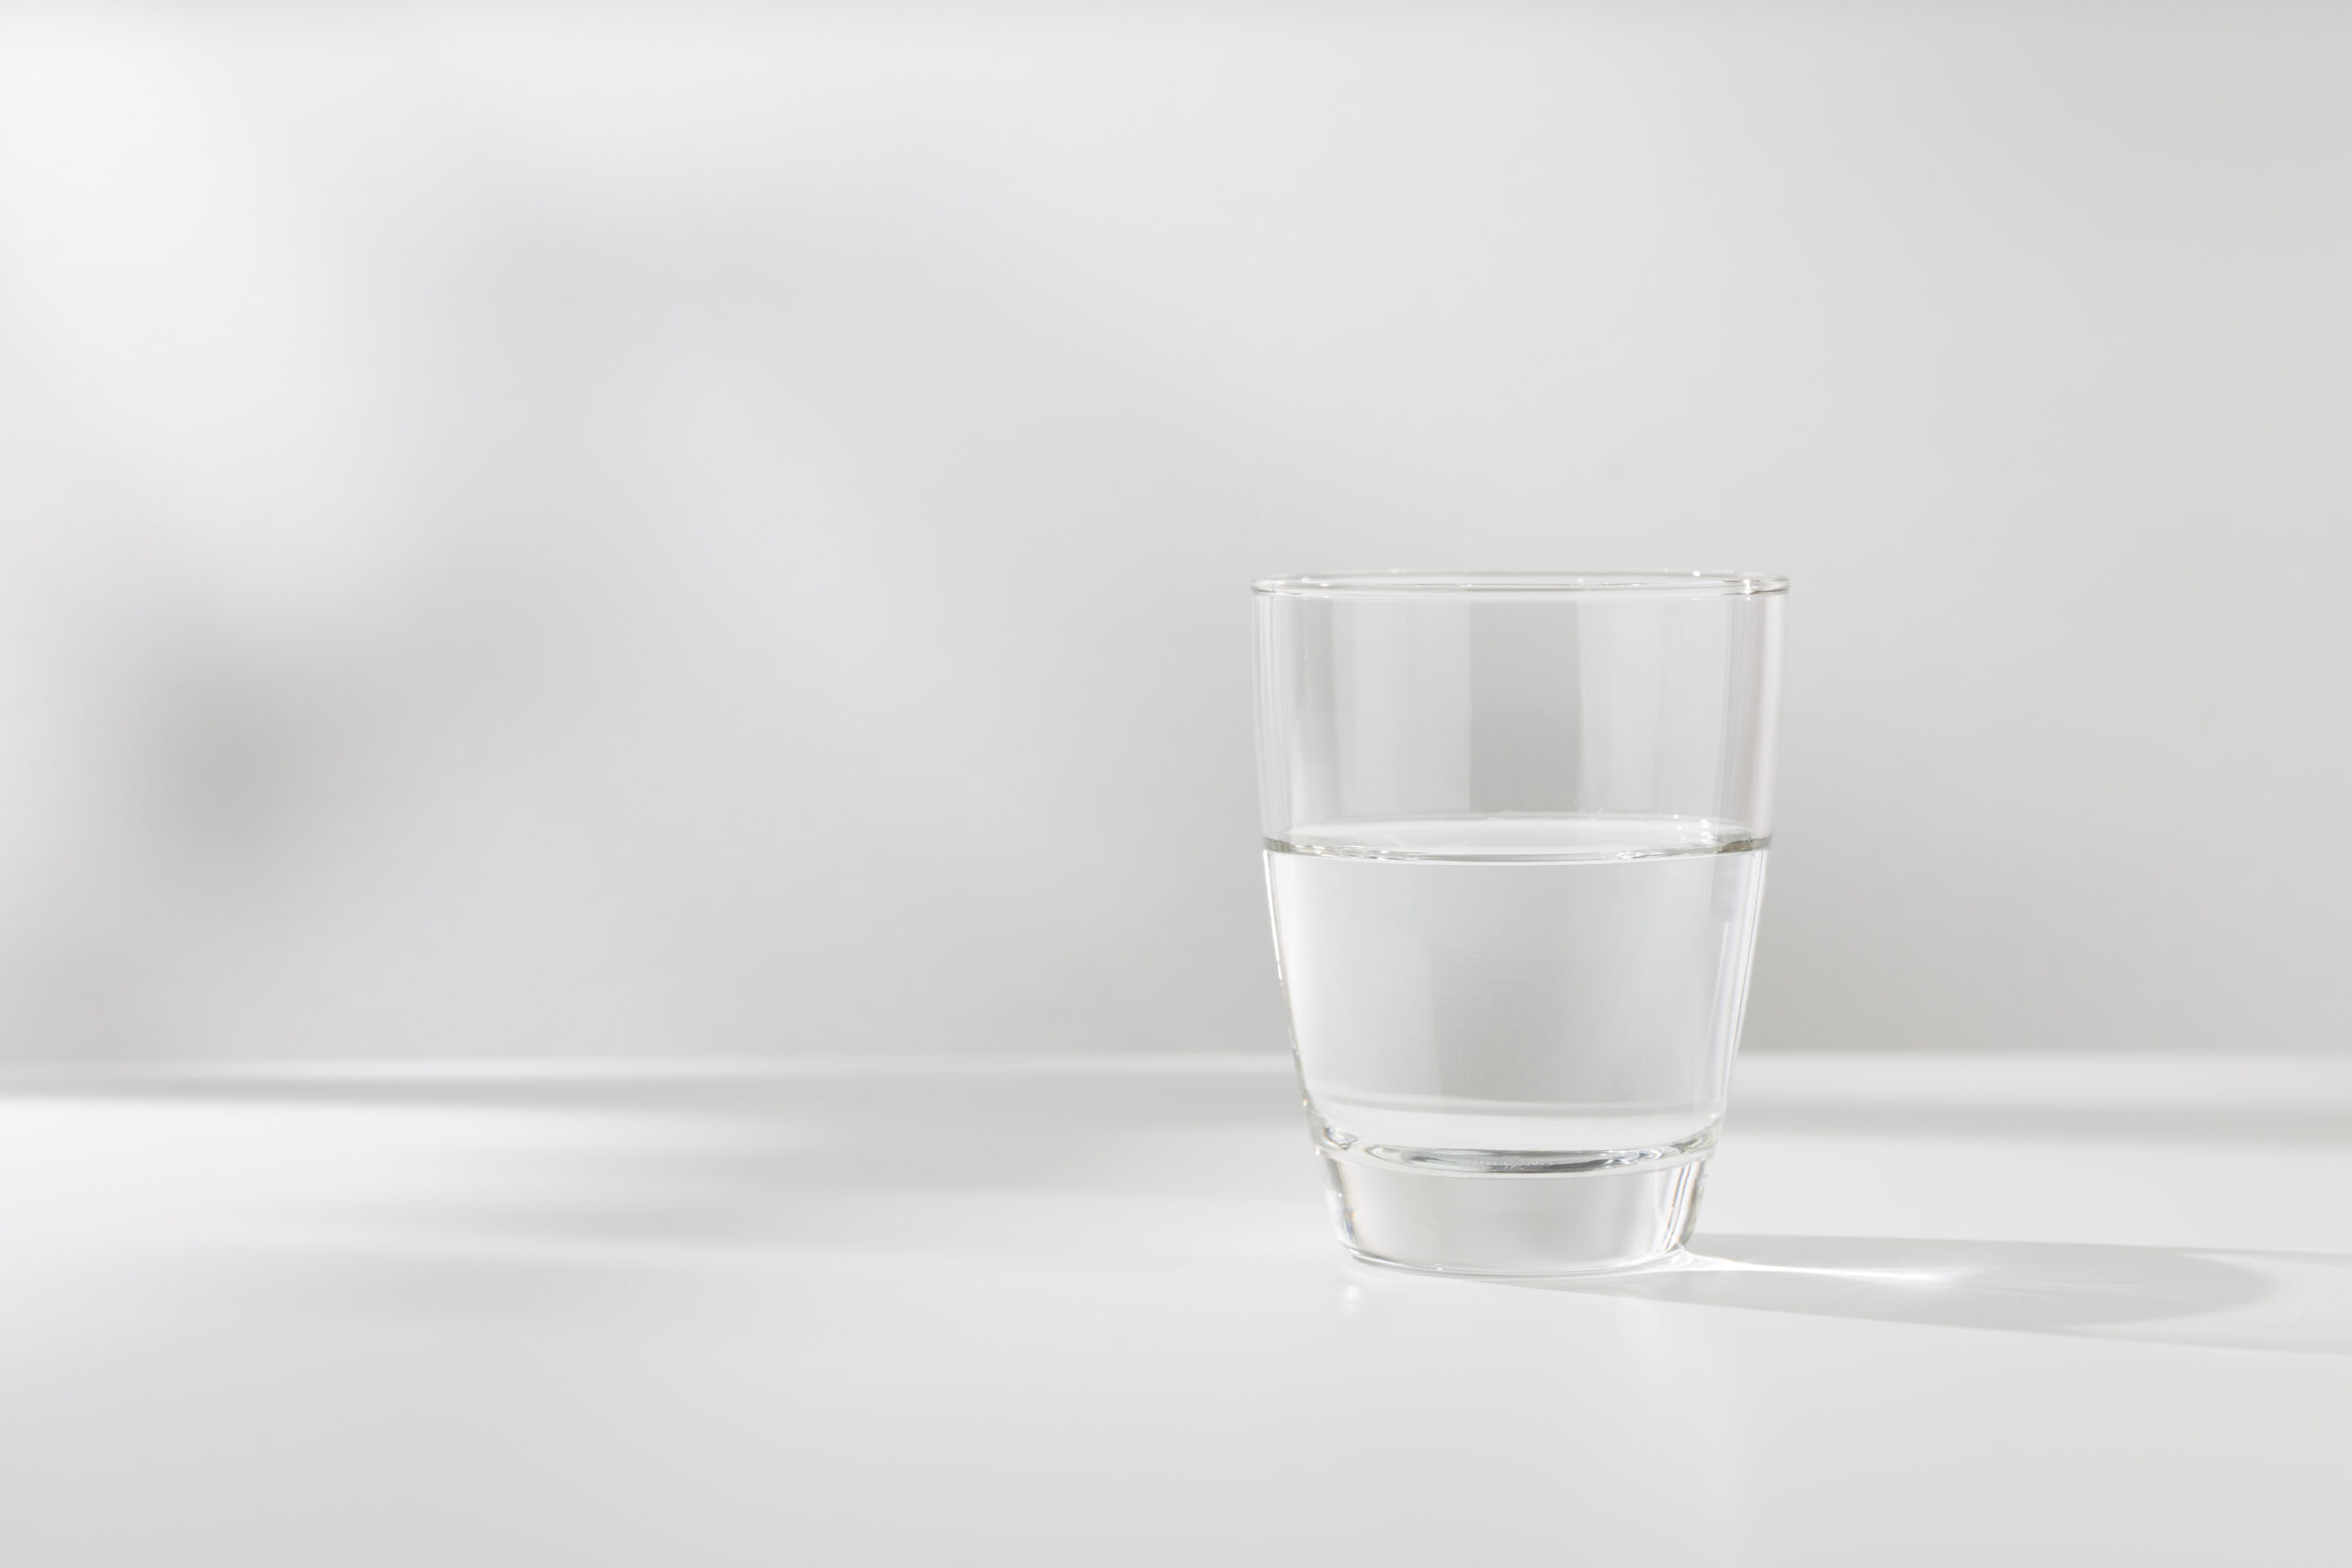 Cup of water on white background